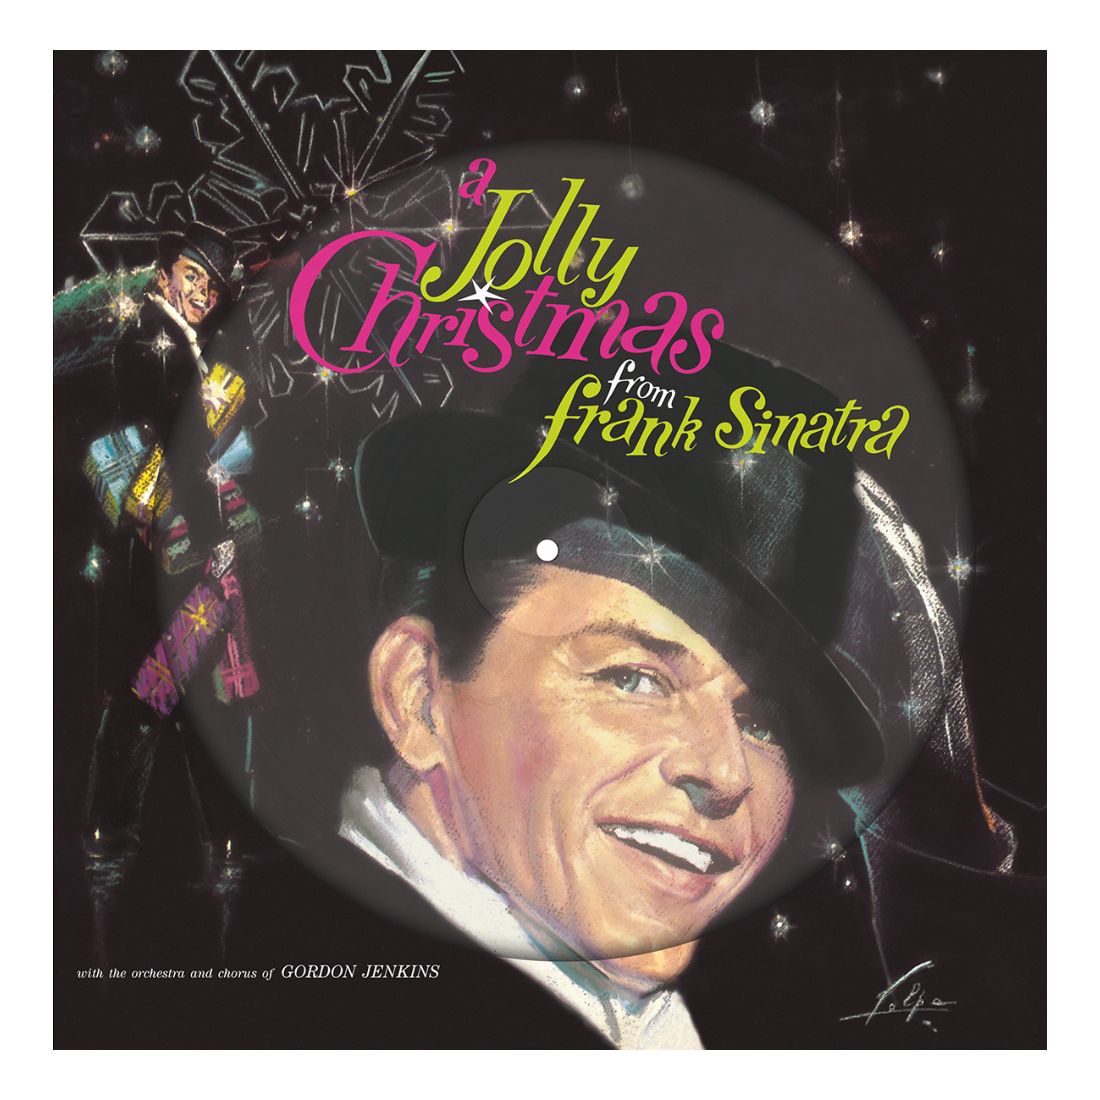 Виниловая пластинка A Jolly Christmas from Frank Sinatra (Picture Disc) | Frank Sinatra frank sinatra a jolly christmas from frank sinatra picture vinyl